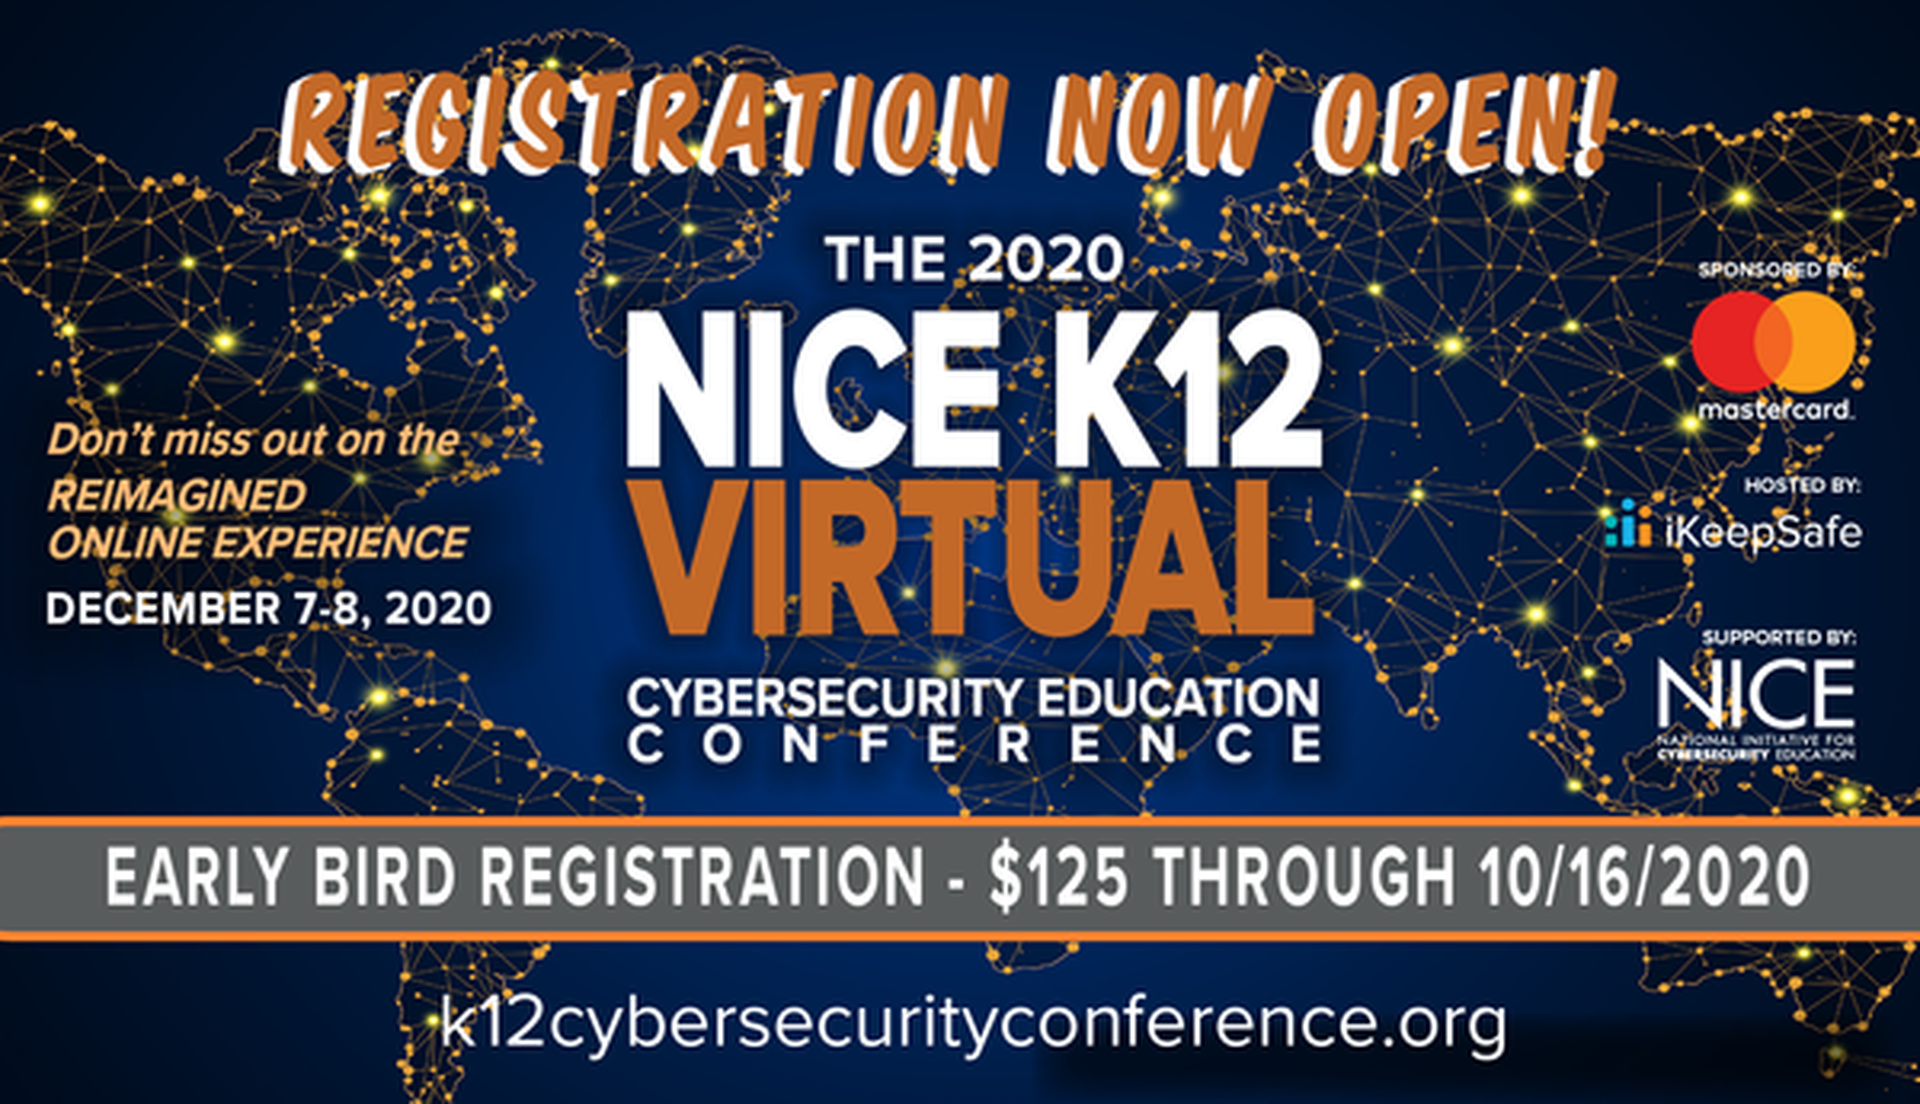 Events such as the National Initiative for Cybersecurity Education (NICE) Virtual Cybersecurity Education Conference planned by NIST this December are viewed as instrumental in encouraging young people to learn more about cybersecurity. Today’s columnist, Laura Lee of By Light Professional IT Services, offers some ideas for how the industry can mor...